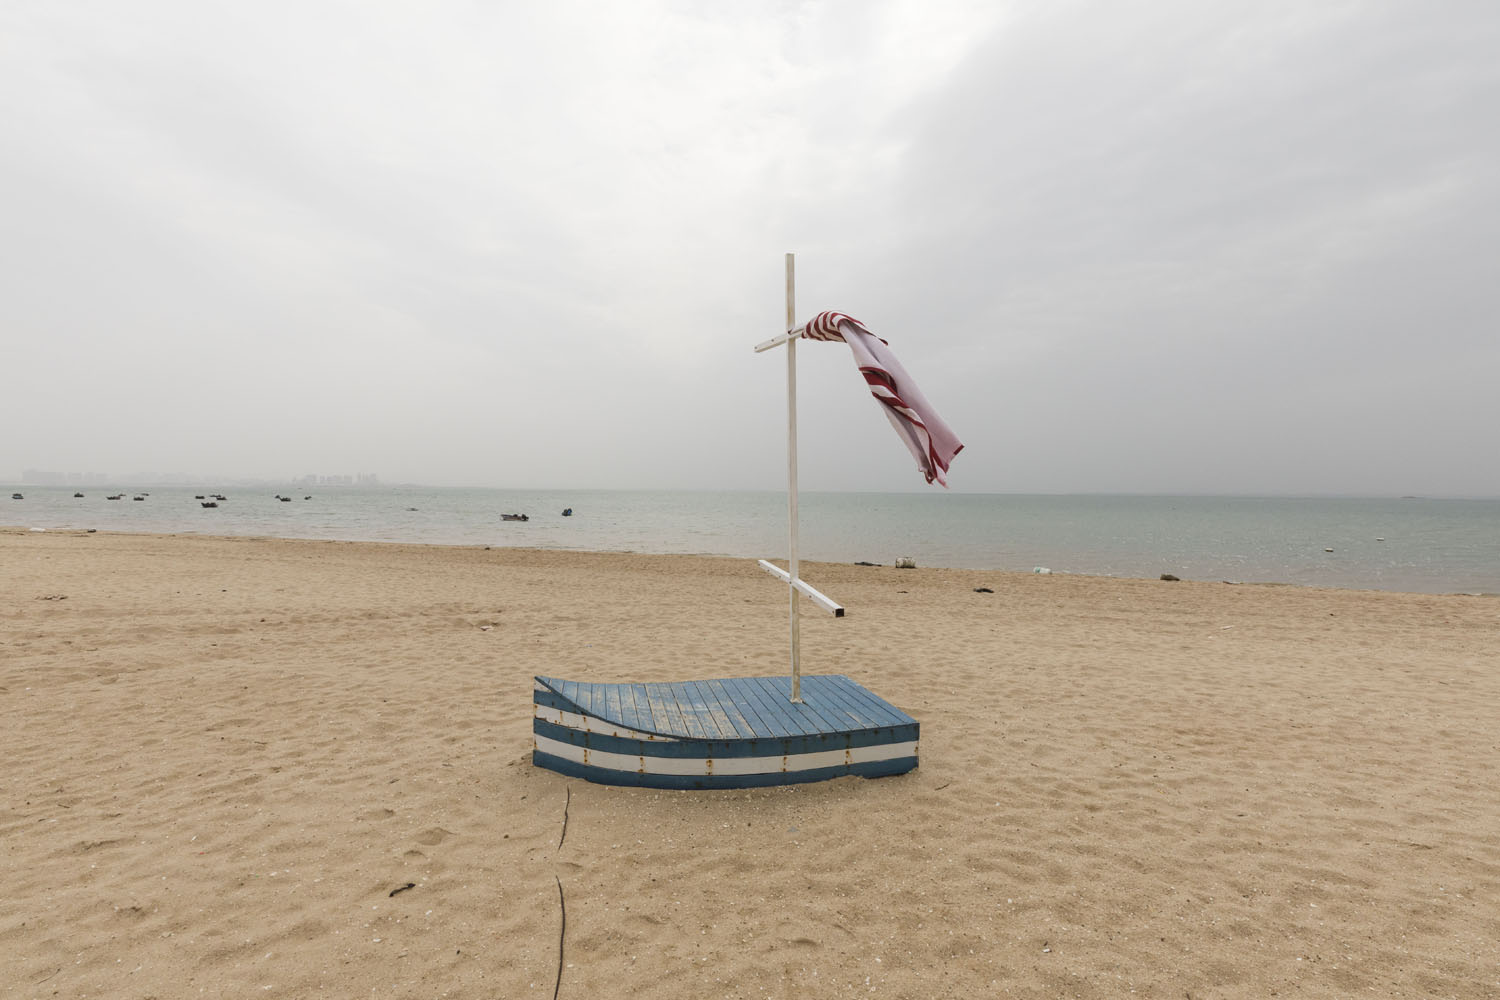 An oversized toy boat used for wedding photography at Guanyinshan Fantasy Beach. Xiamen, China. 2018.